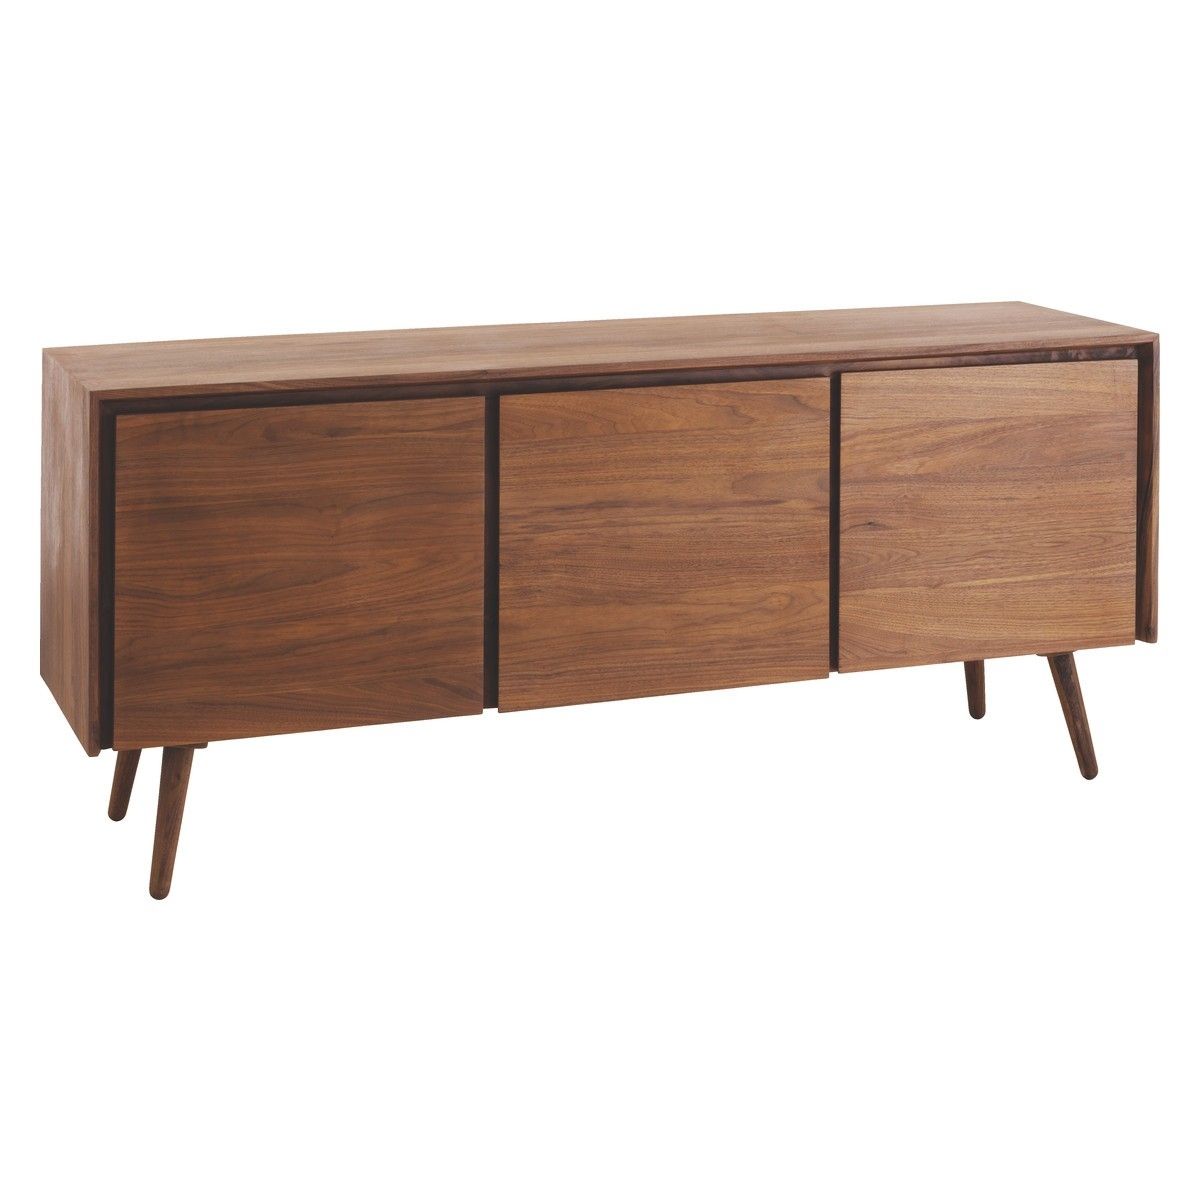 Vince Walnut 3 Door Mid Century Sideboard | Buy Now At Habitat Uk Intended For Current Walnut Small Sideboards (View 11 of 20)